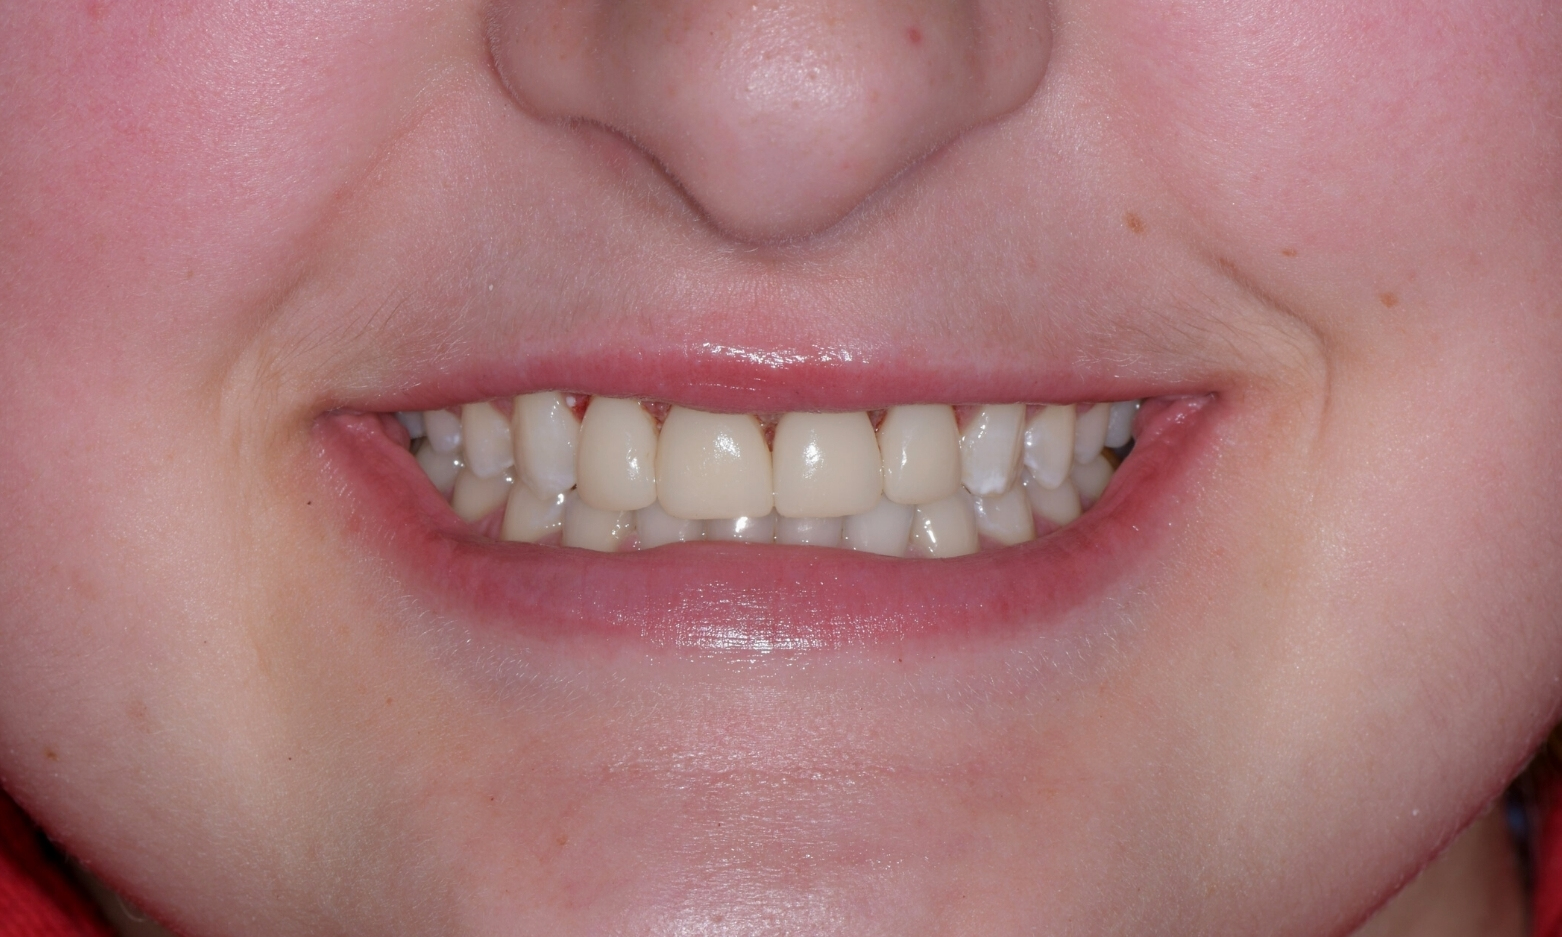 Eckland Family Dentistry - Composite Bonding Case Study - After